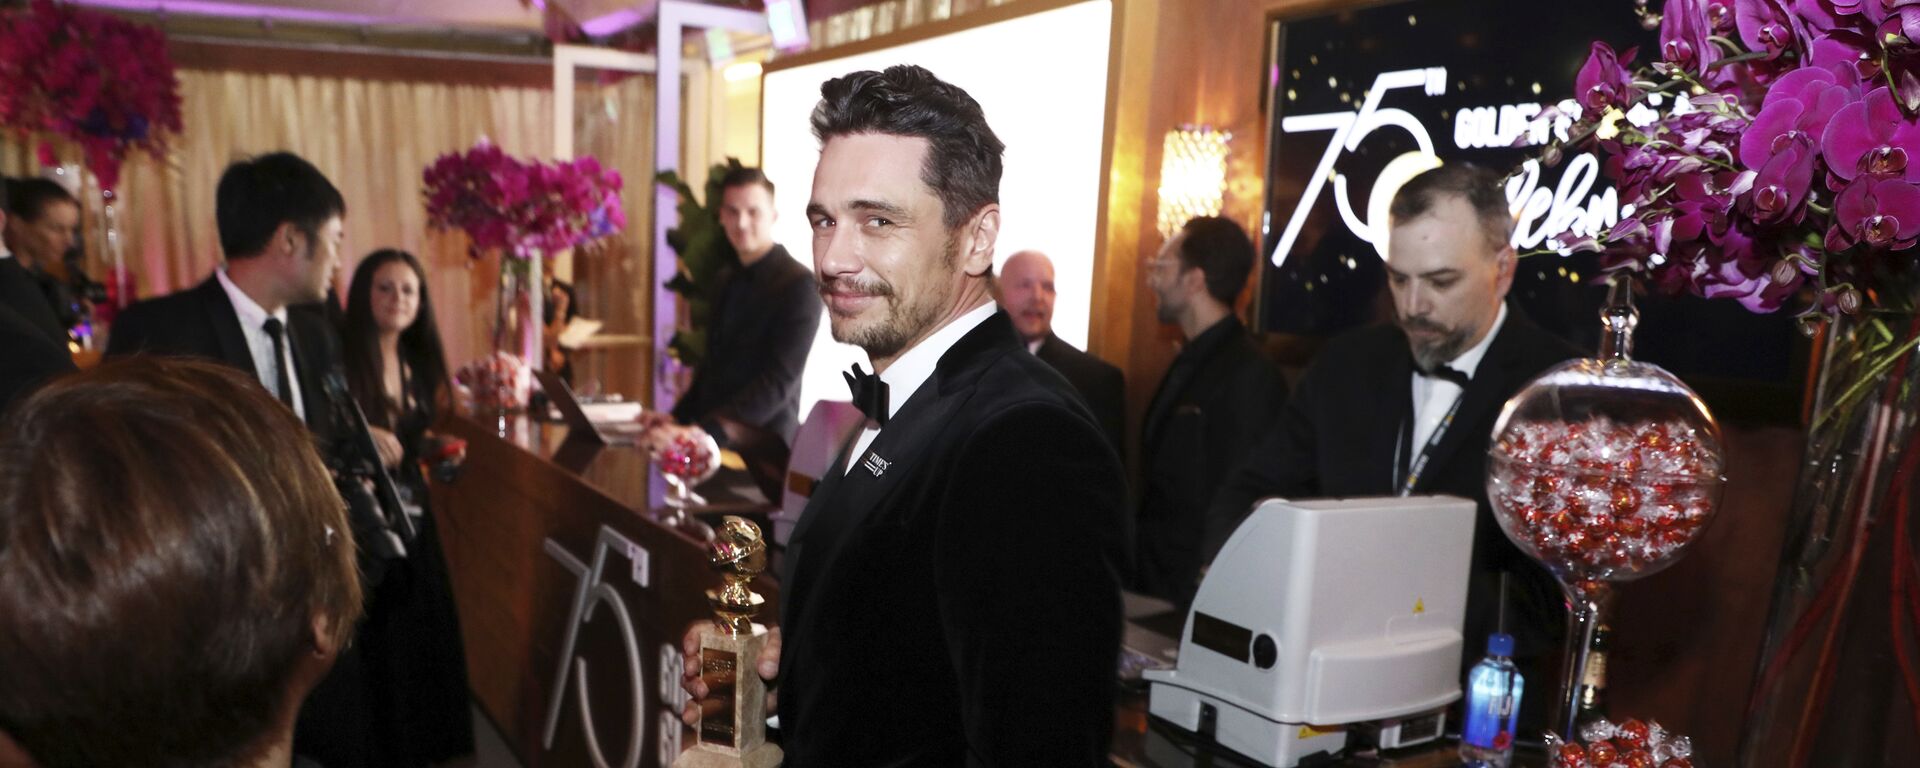 James Franco is seen at the Golden Globes Official After Party sponsored by Lindt Chocolate on Sunday, Jan. 7, 2018 in Beverly Hills, Calif - Sputnik International, 1920, 23.12.2021